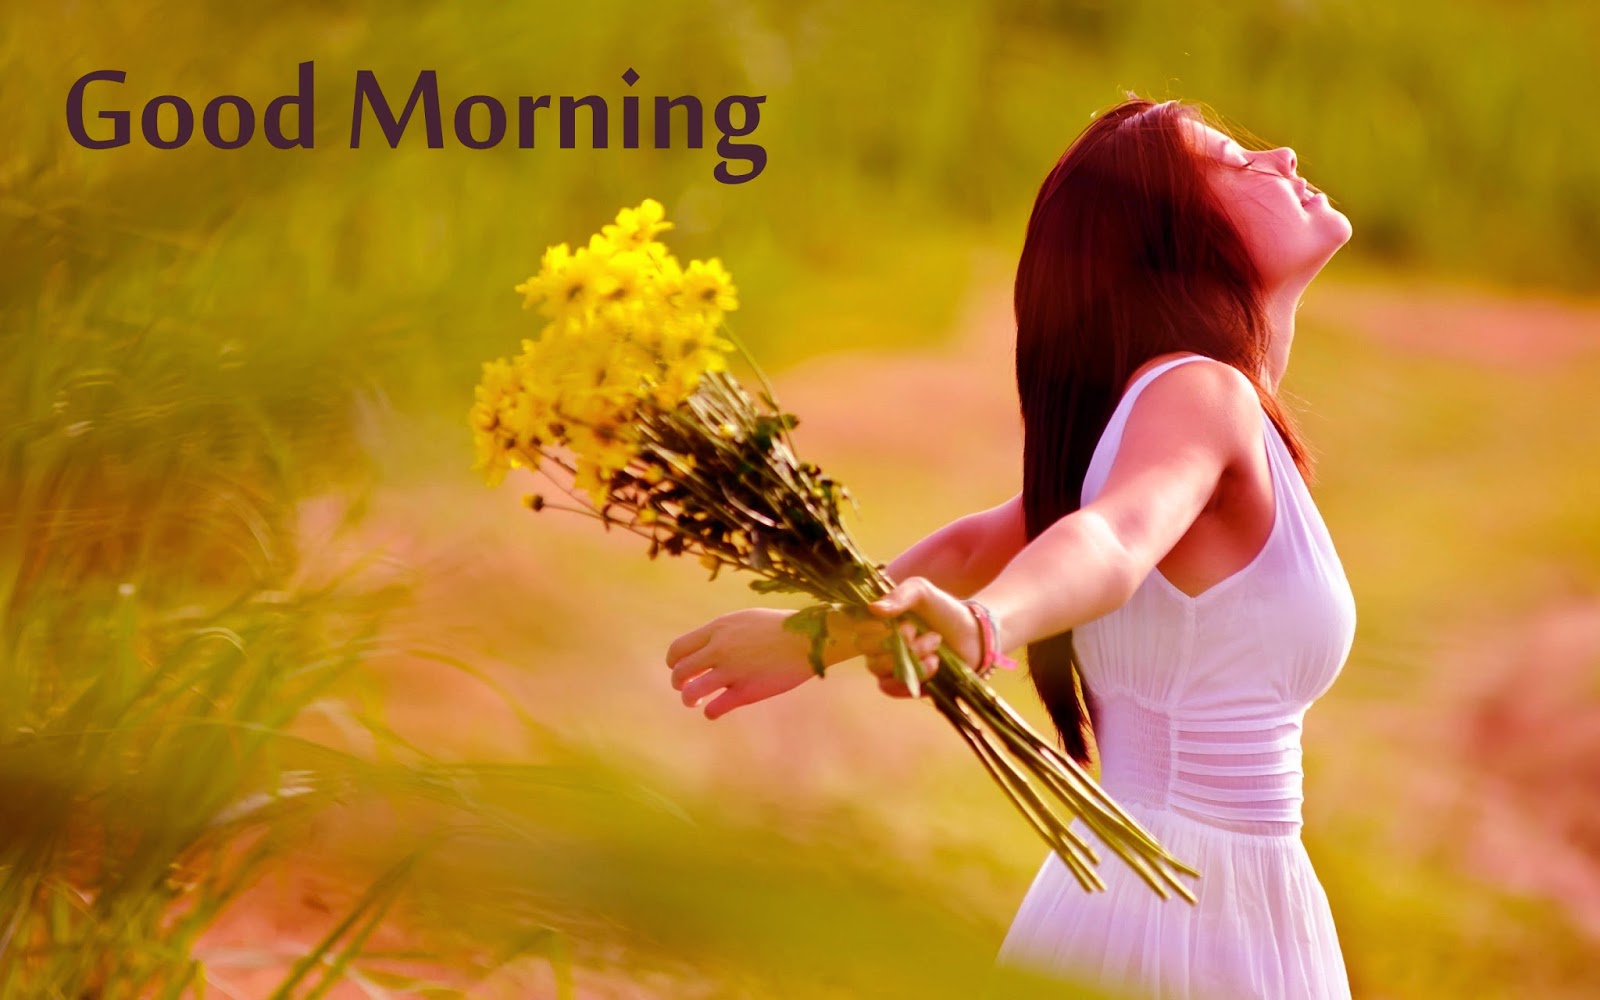 images of good morning girl download